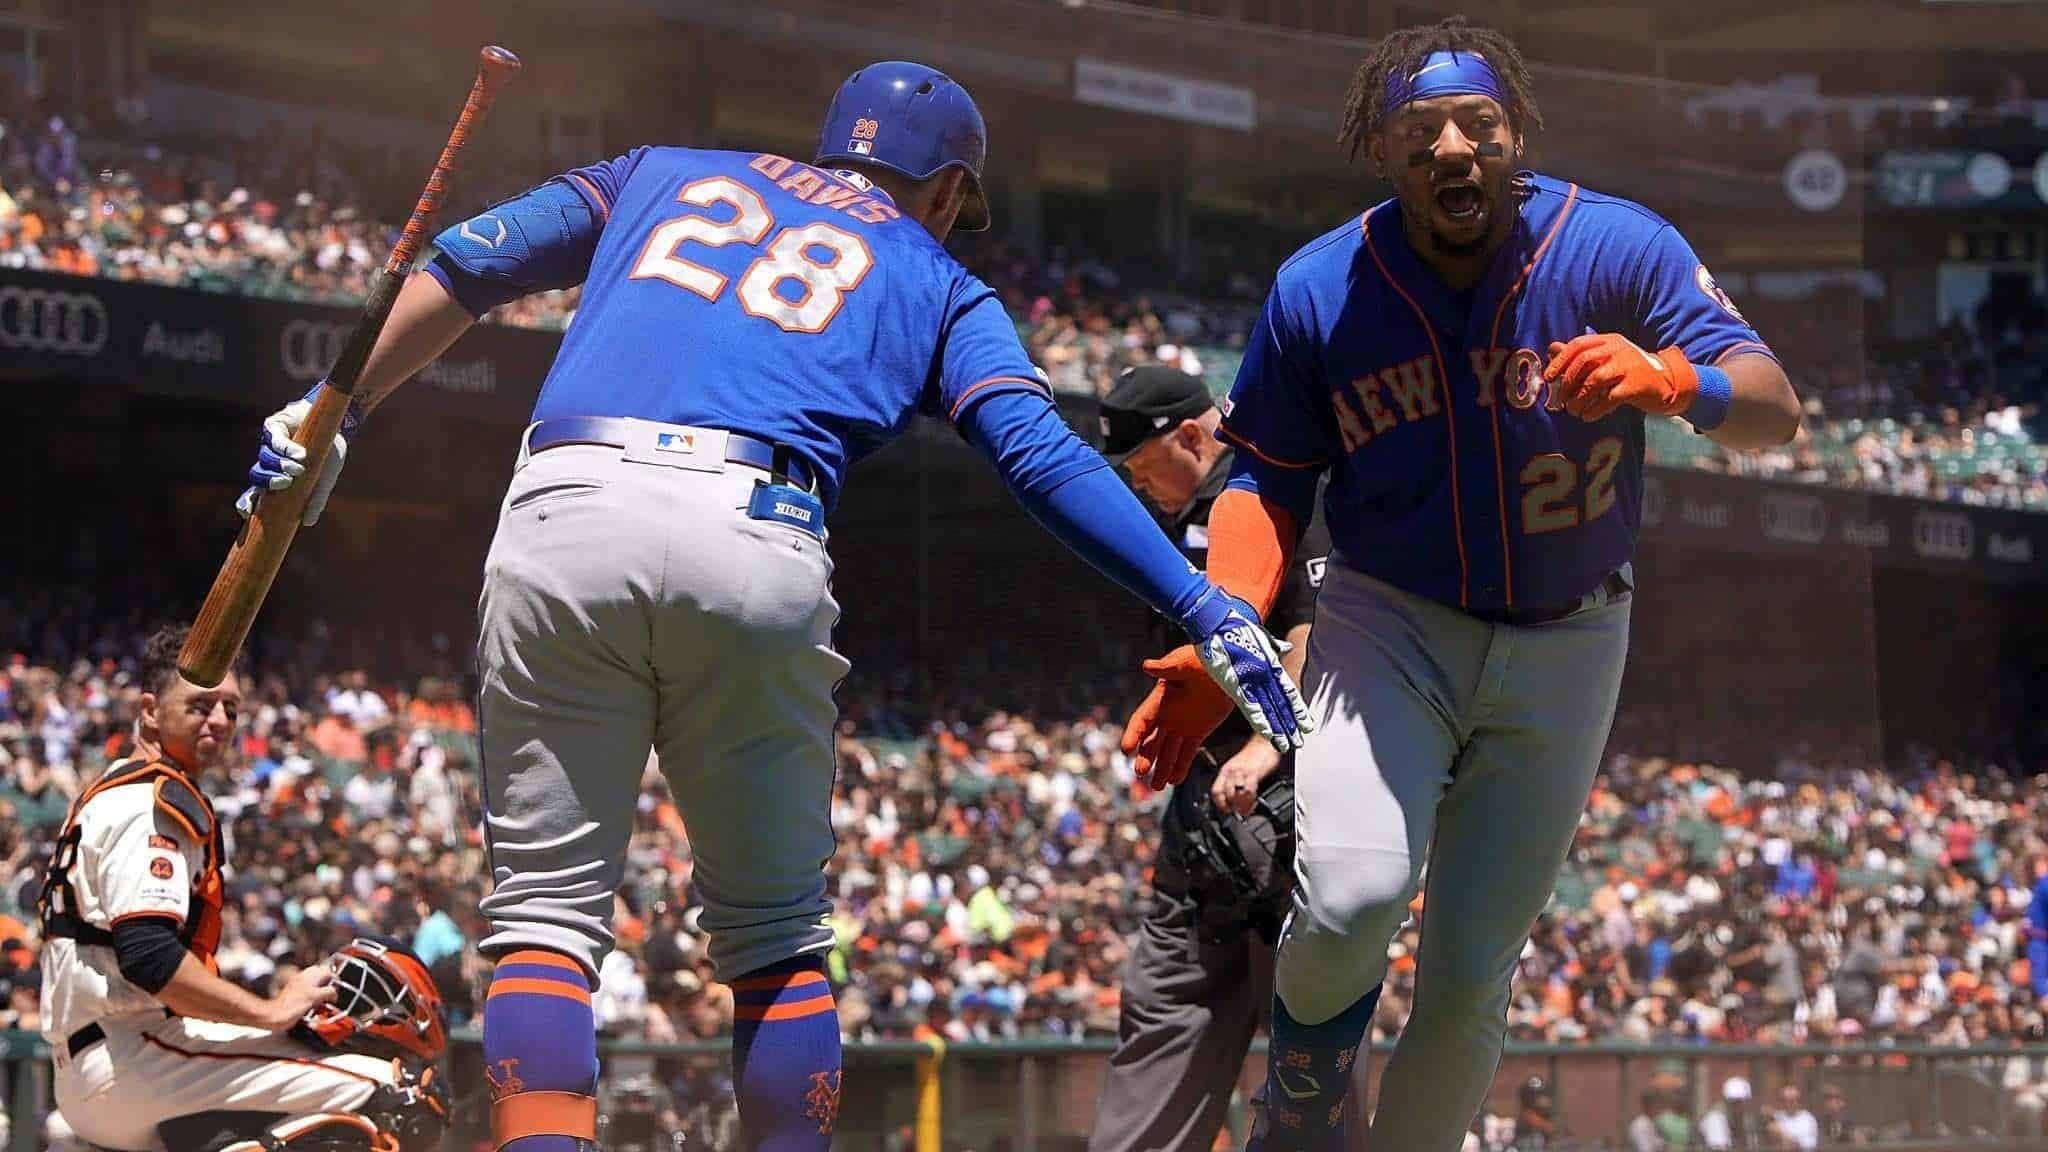 SAN FRANCISCO, CA - JULY 20: Dominic Smith #22 of the New York Mets is congratulated by J.D. Davis #28 after Smith hit a solo home run against the San Francisco Giants in the top of the second inning at Oracle Park on July 20, 2019 in San Francisco, California.